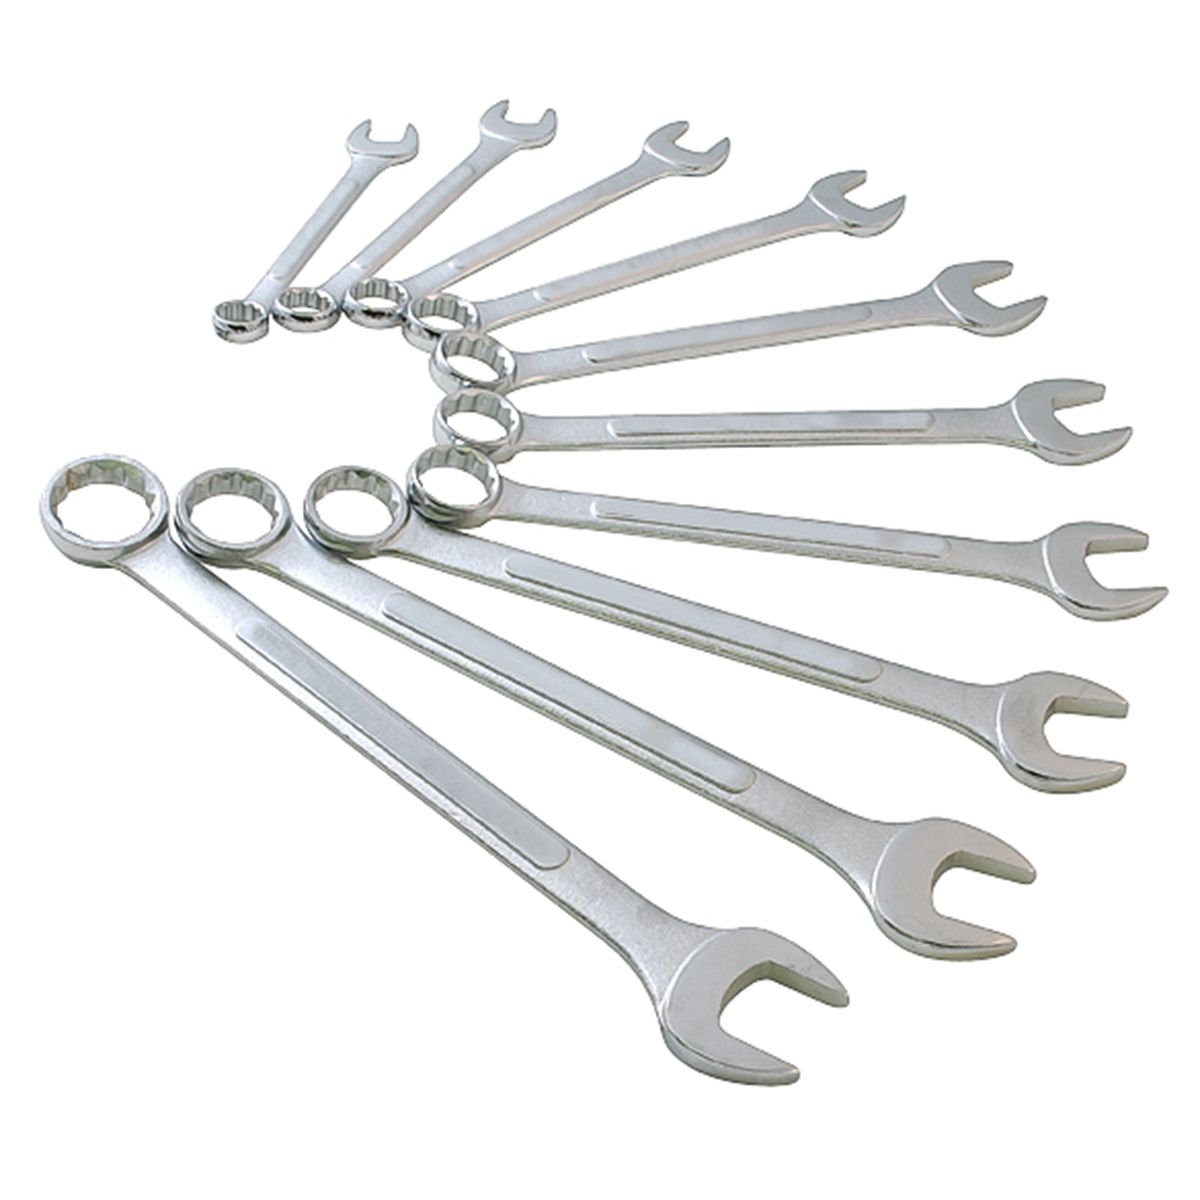 Adjustable Hook Spanner Wrench Set w Roll Pouch 4 Pc, J.H. Williams